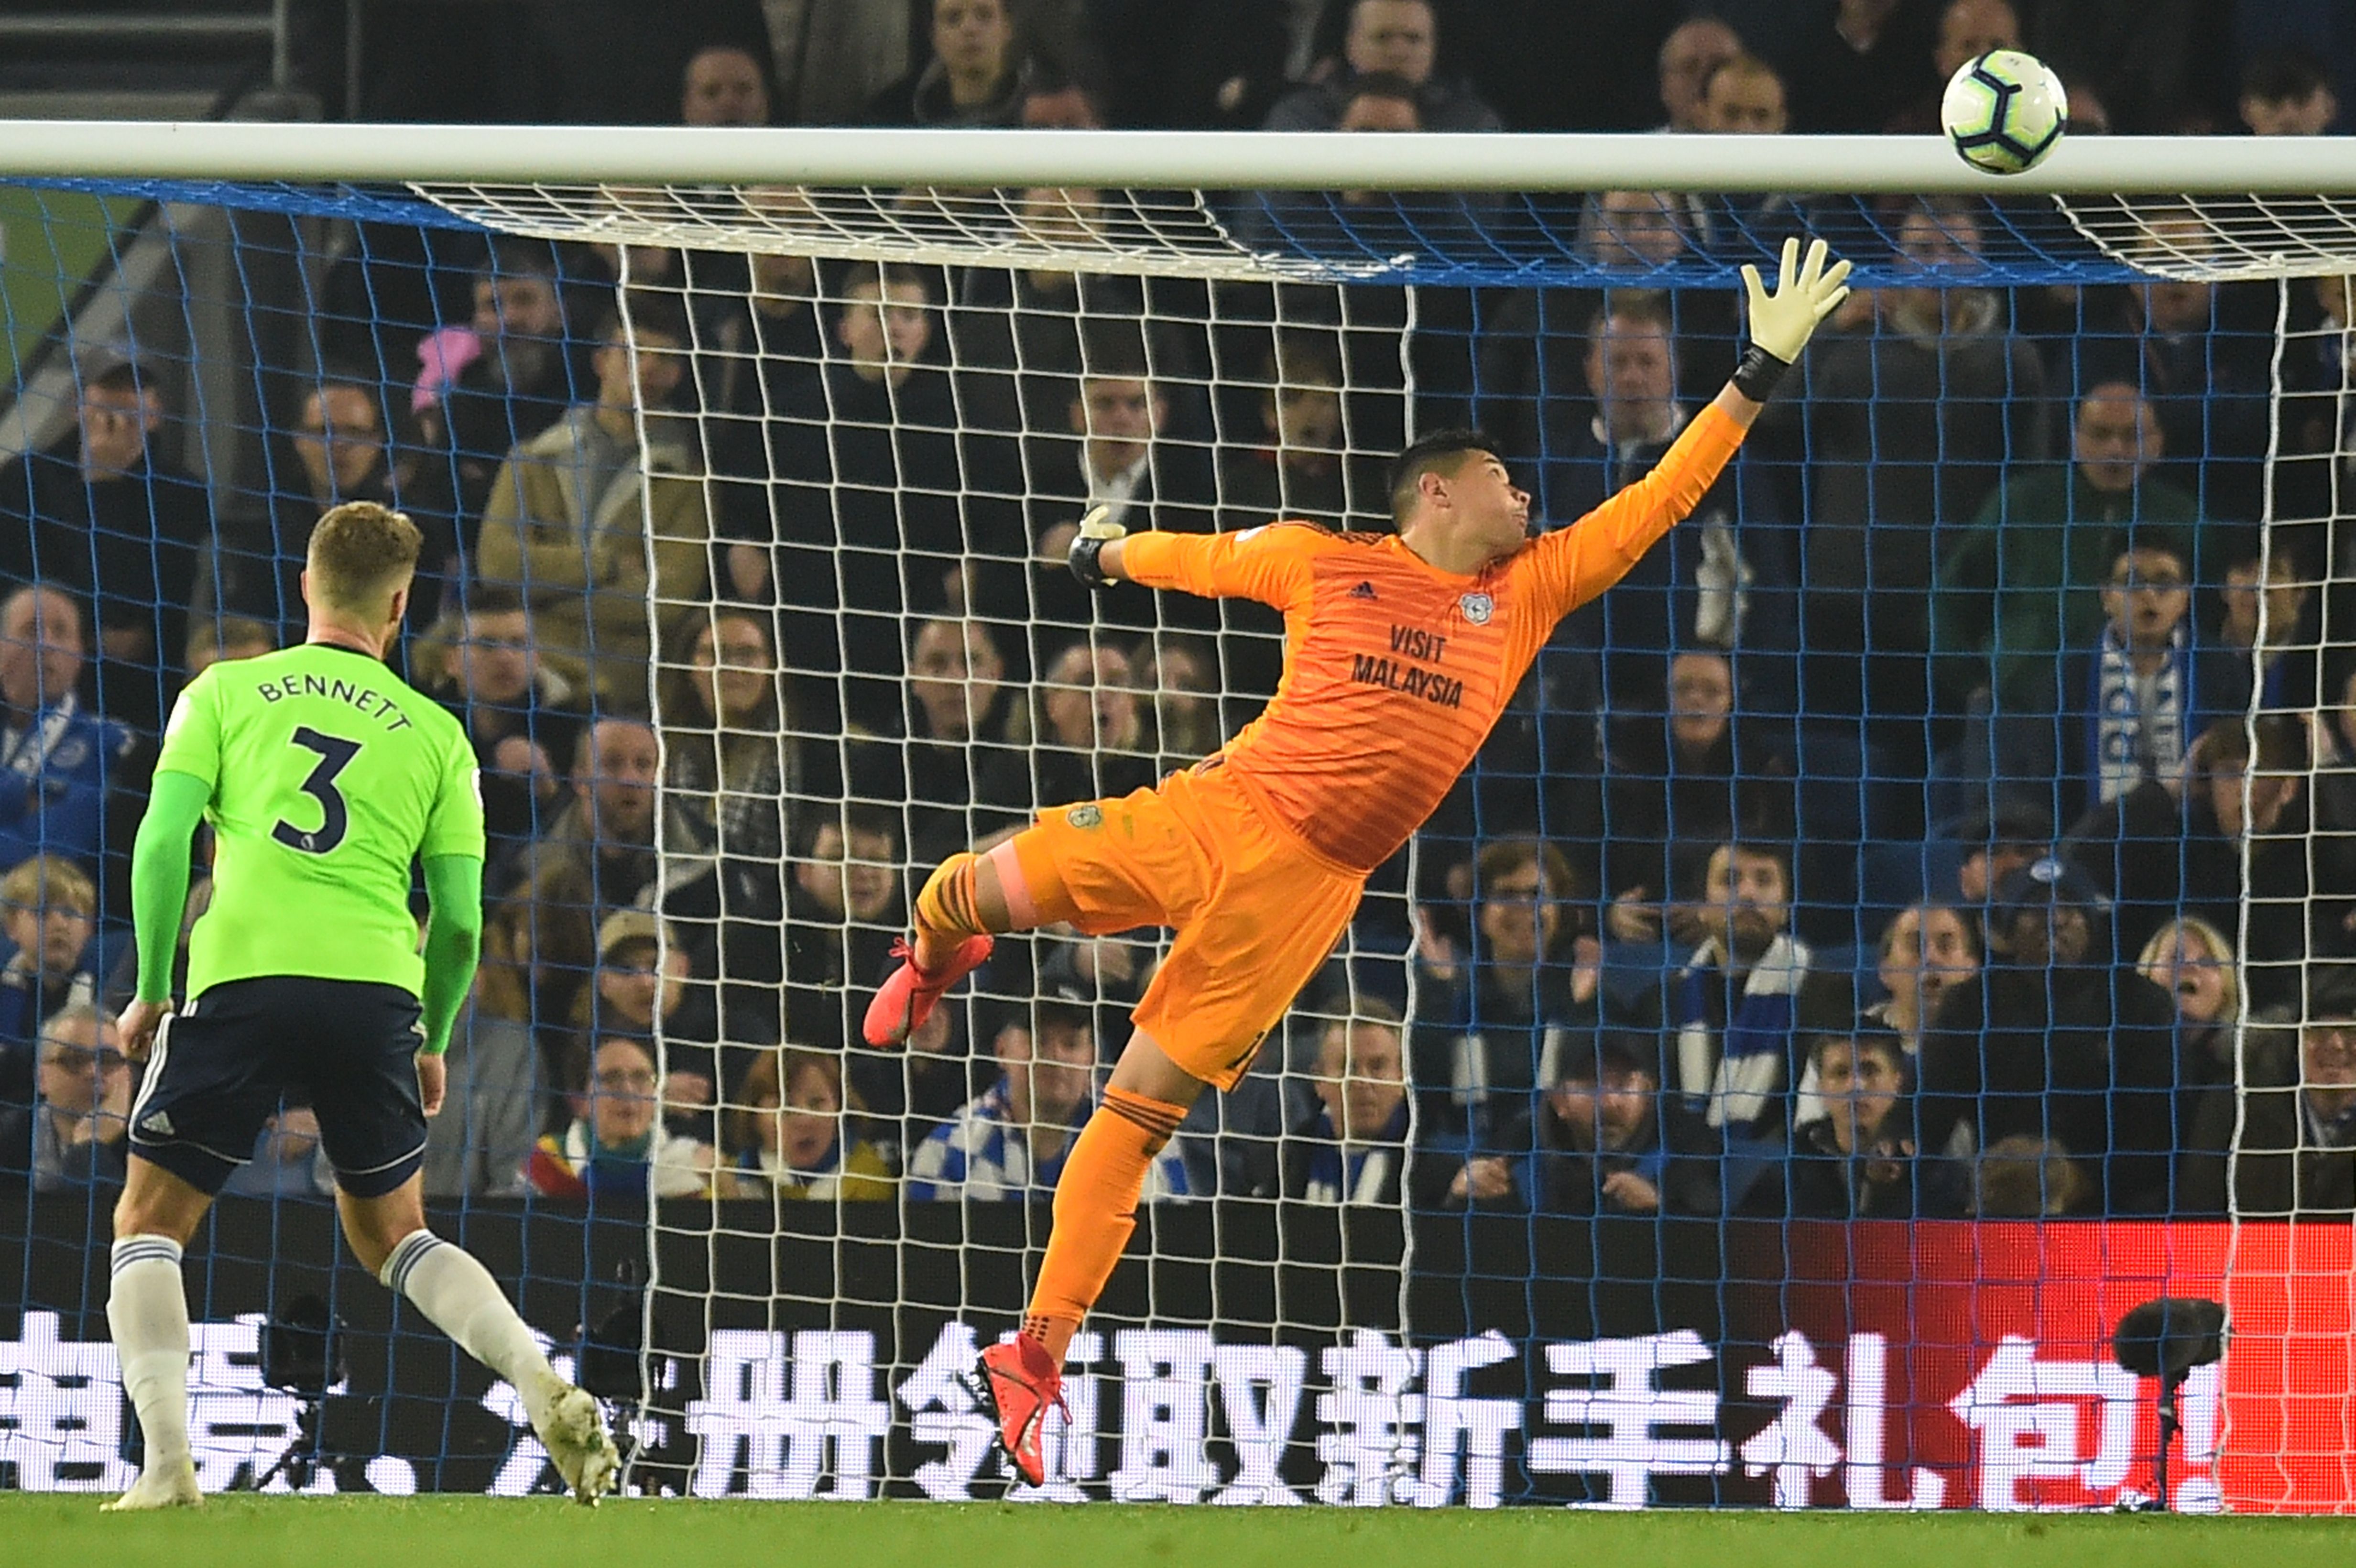 Cardiff City's English-born Filipino goalkeeper Neil Etheridge (R) reaches for a shot that goes over the bar during the English Premier League football match between Brighton and Hove Albion and Cardiff City at the American Express Community Stadium in Brighton, southern England on April 19, 2019. (Photo by Glyn KIRK / AFP) / RESTRICTED TO EDITORIAL USE. No use with unauthorized audio, video, data, fixture lists, club/league logos or 'live' services. Online in-match use limited to 120 images. An additional 40 images may be used in extra time. No video emulation. Social media in-match use limited to 120 images. An additional 40 images may be used in extra time. No use in betting publications, games or single club/league/player publications. /         (Photo credit should read GLYN KIRK/AFP/Getty Images)